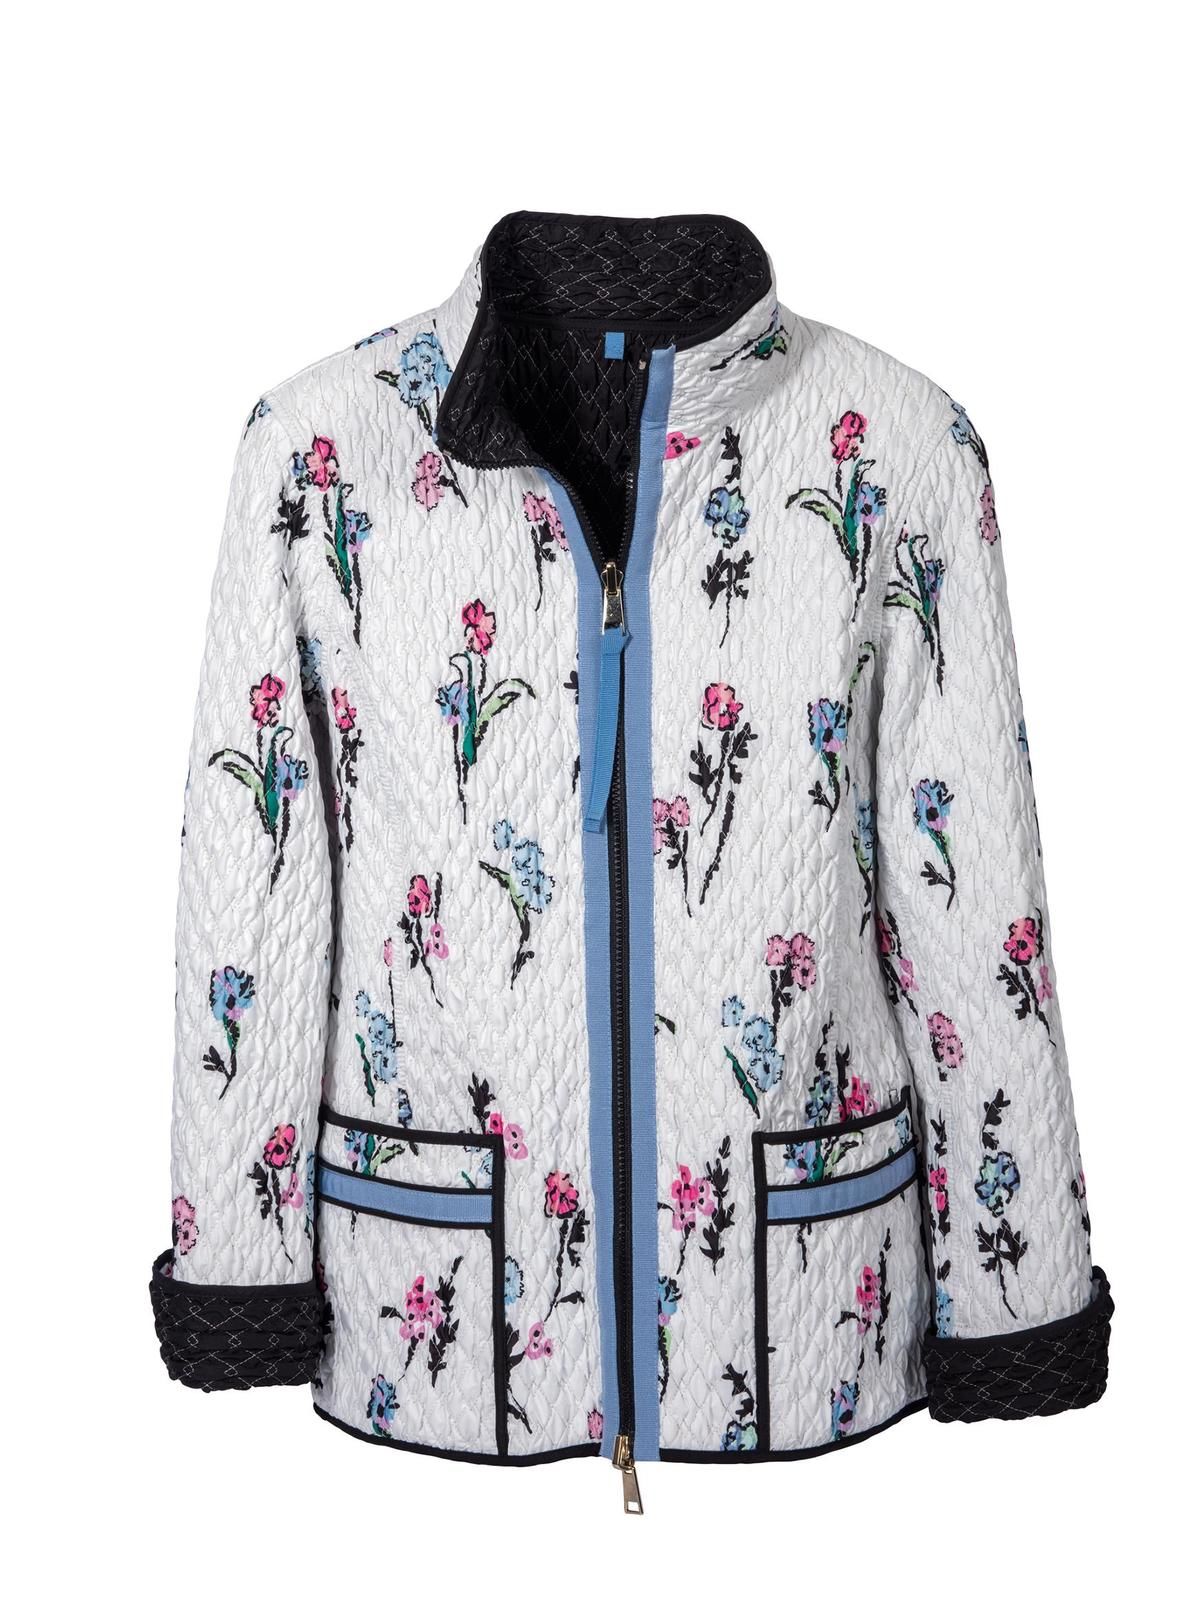 Fiori Quilted Reversible Jacket - Maus & Hoffman